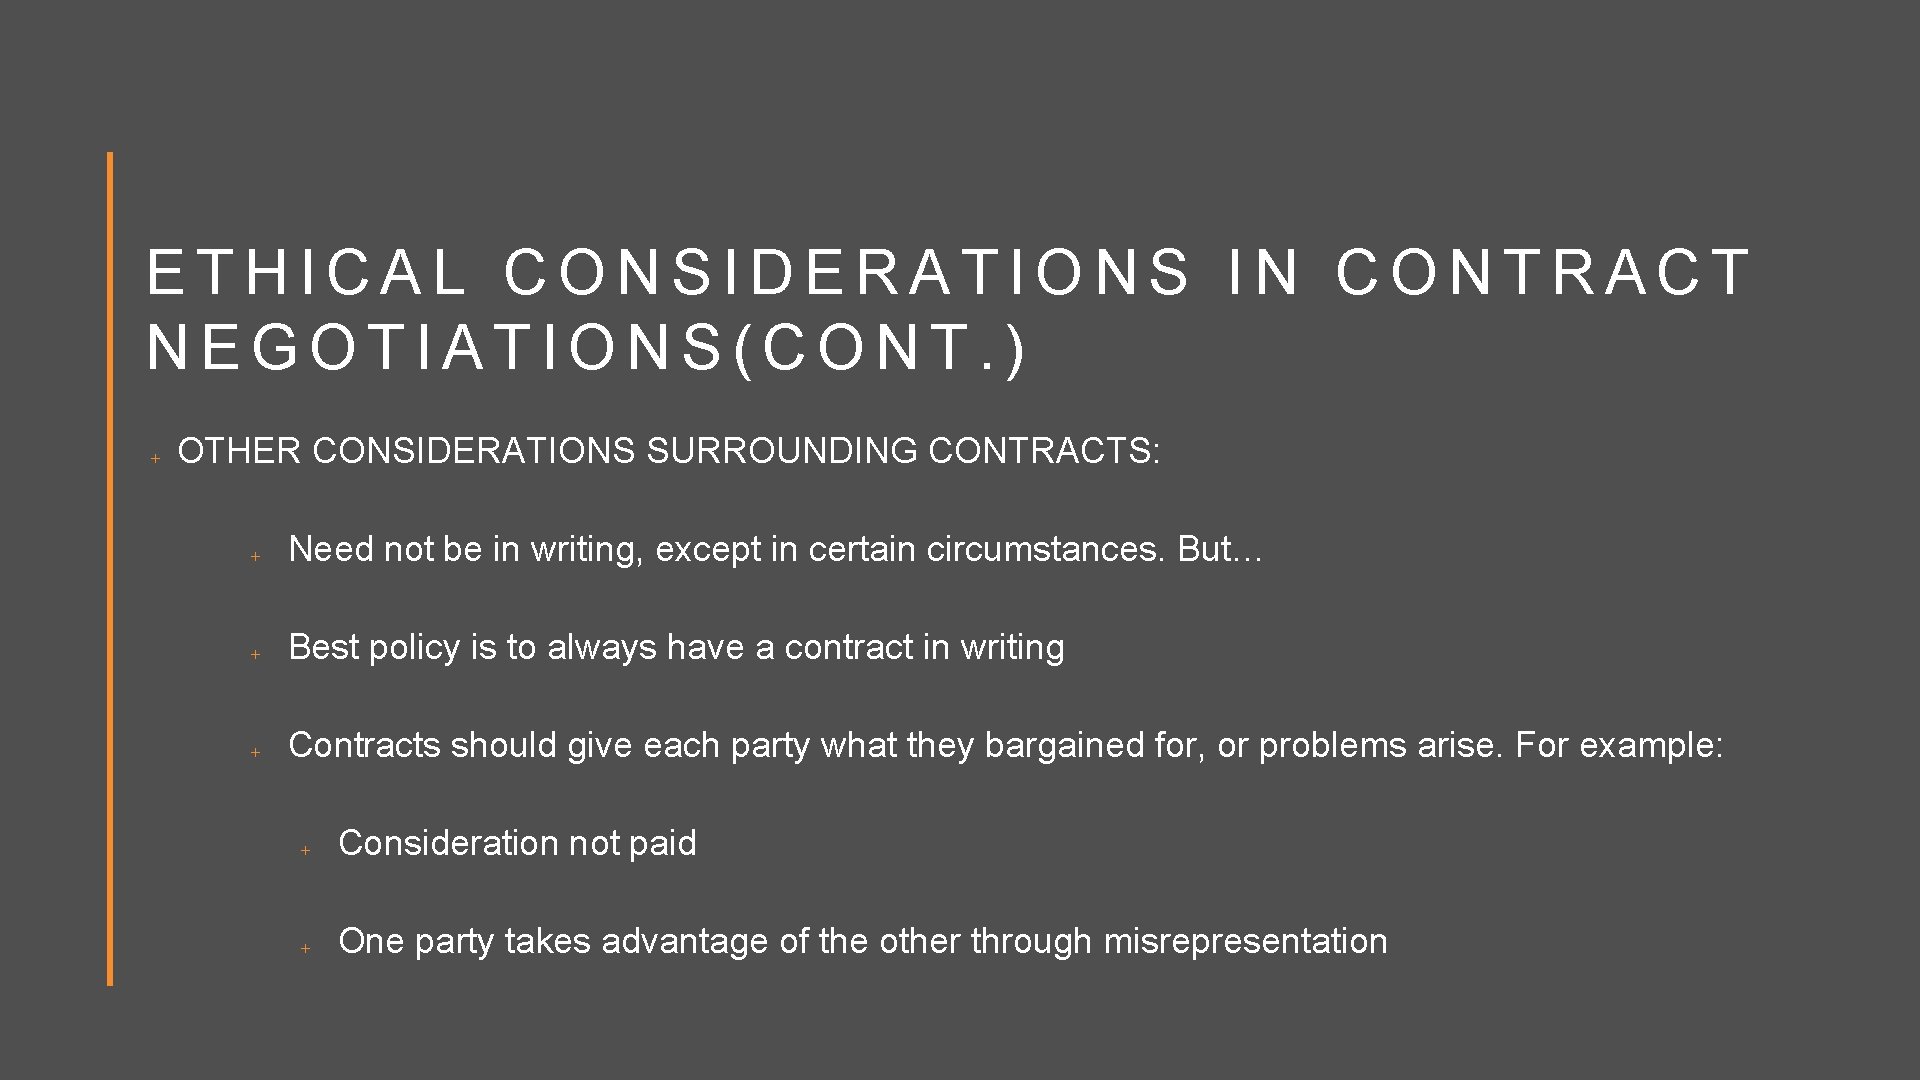 ETHICAL CONSIDERATIONS IN CONTRACT NEGOTIATIONS(CONT. ) OTHER CONSIDERATIONS SURROUNDING CONTRACTS: Need not be in